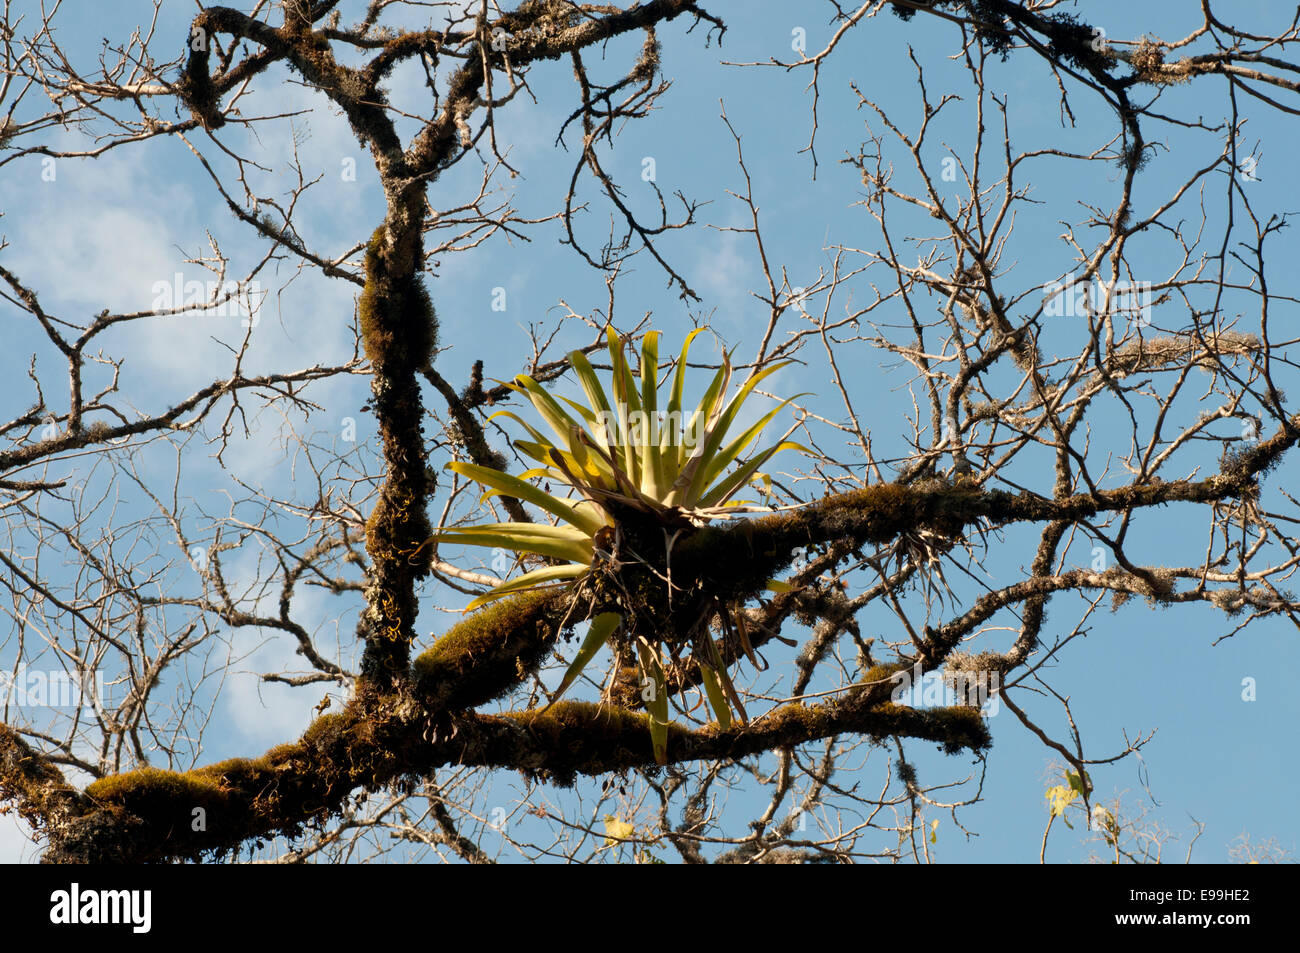 The leaves of Tillandsia, an epiphytic bromeliad on a tree in Laguna Maria, Mexico Stock Photo